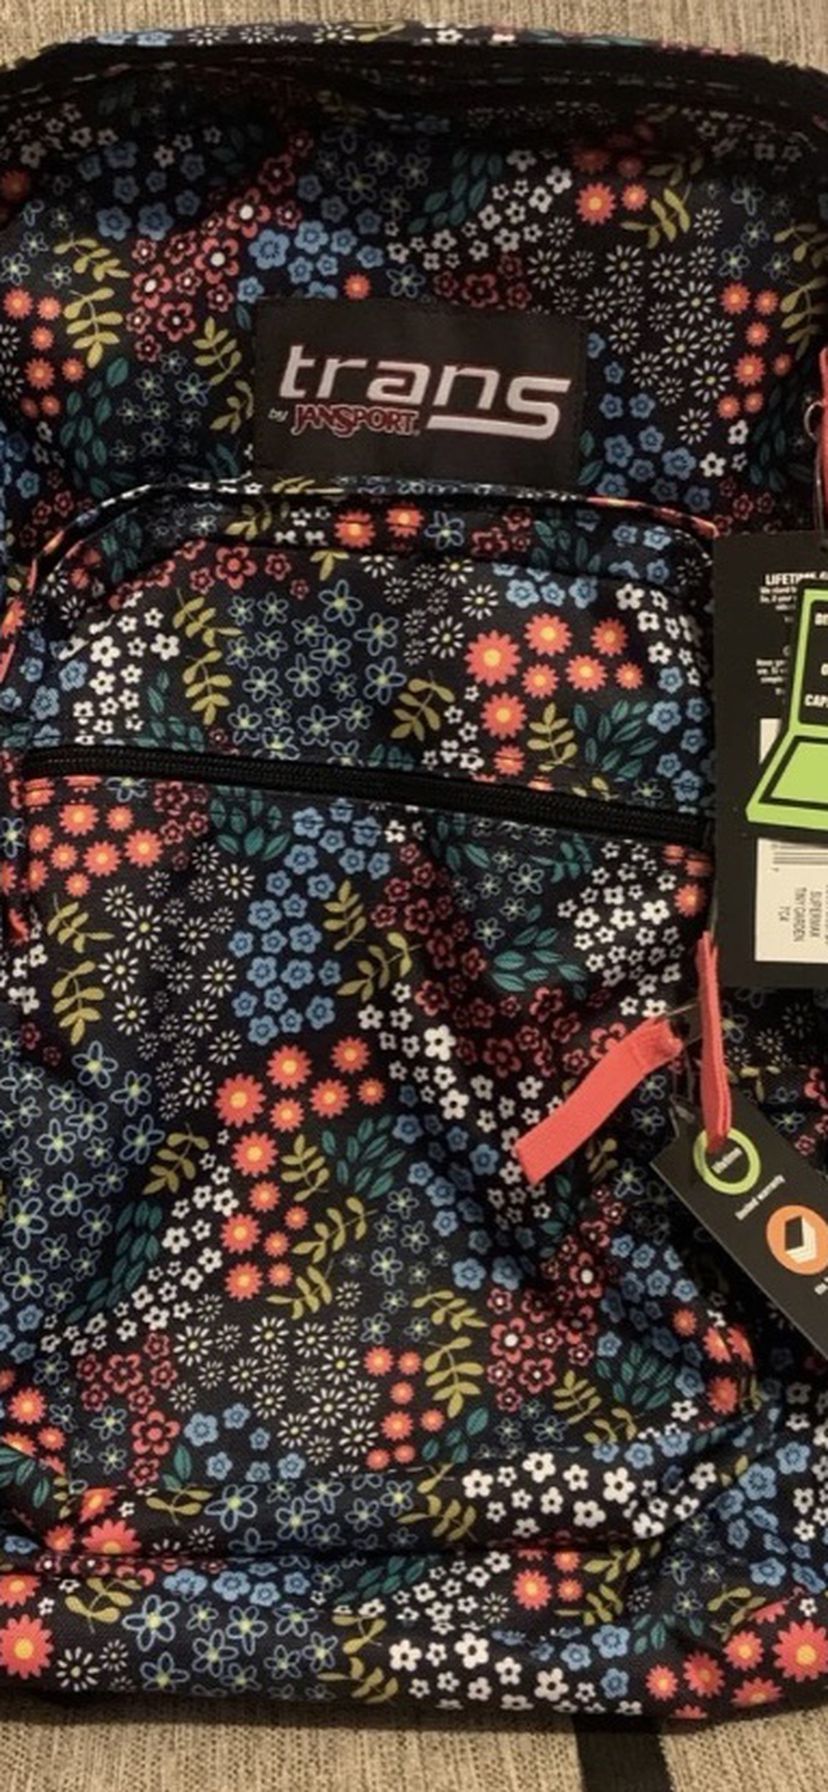 Trans by jansport backpack New with tags on it